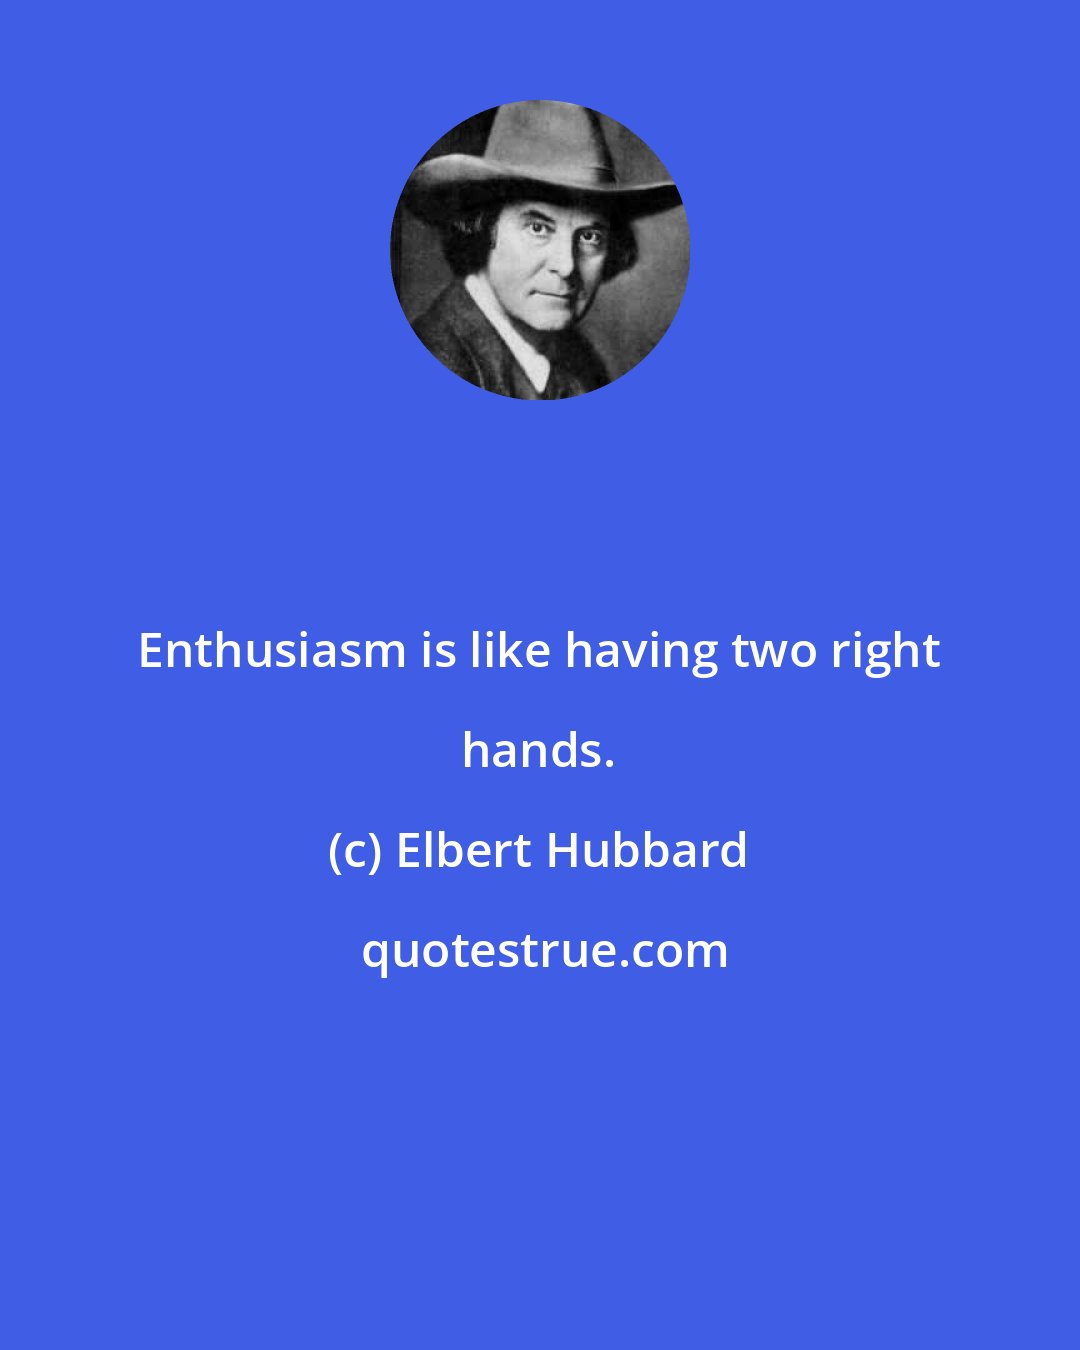 Elbert Hubbard: Enthusiasm is like having two right hands.